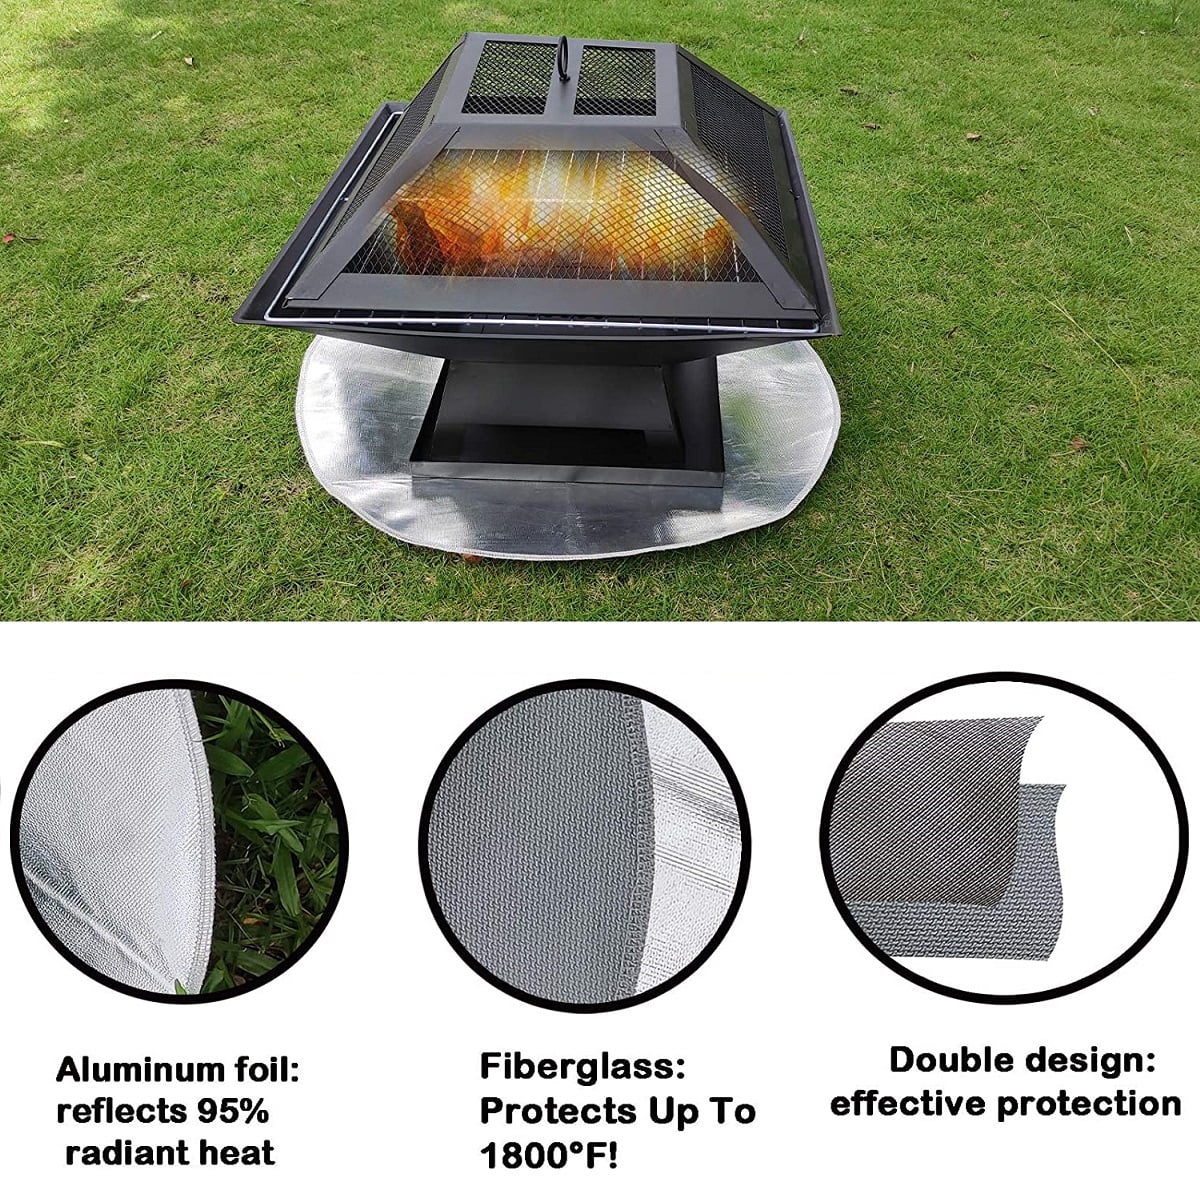 Foldable Fireproof Mat 36 24 Inch Fire Pit Mat For Deck Heat Resistant Firepit Mat Round Fiberglass Aluminum Foil Fire Pit Pad For Outdoor Wood Burning Charcoal Grill Chiminea Patio Grass Lawn